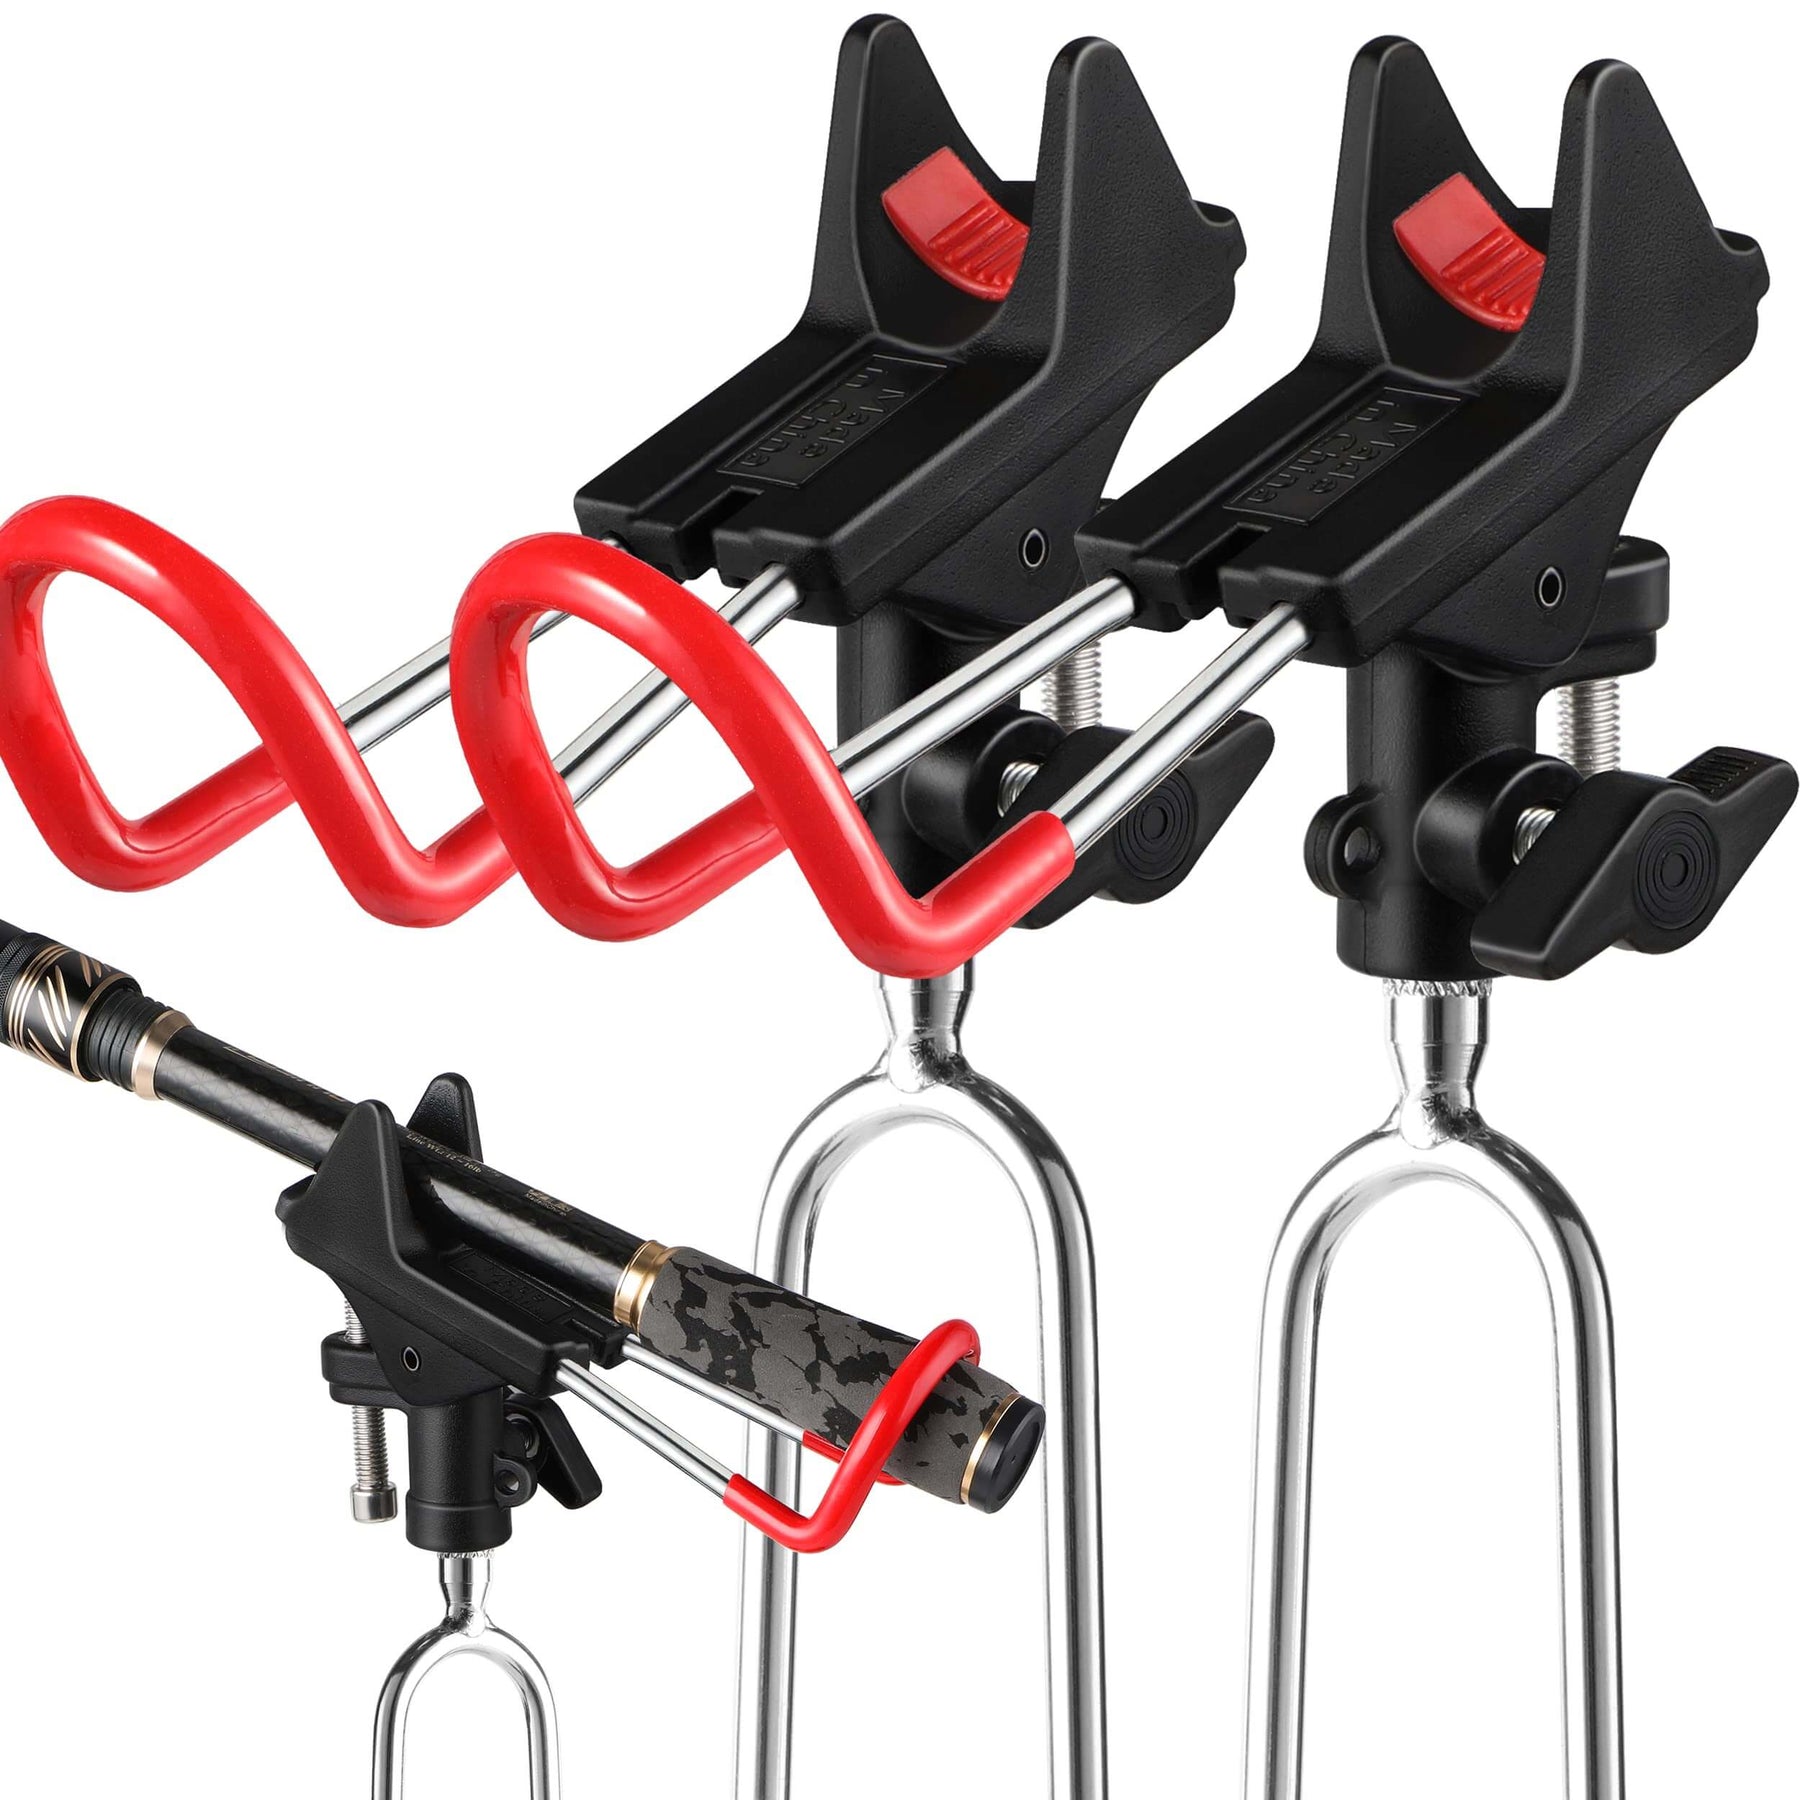 Stay organized and catch more fish: A closer look at bank fishing rod  storage solutions